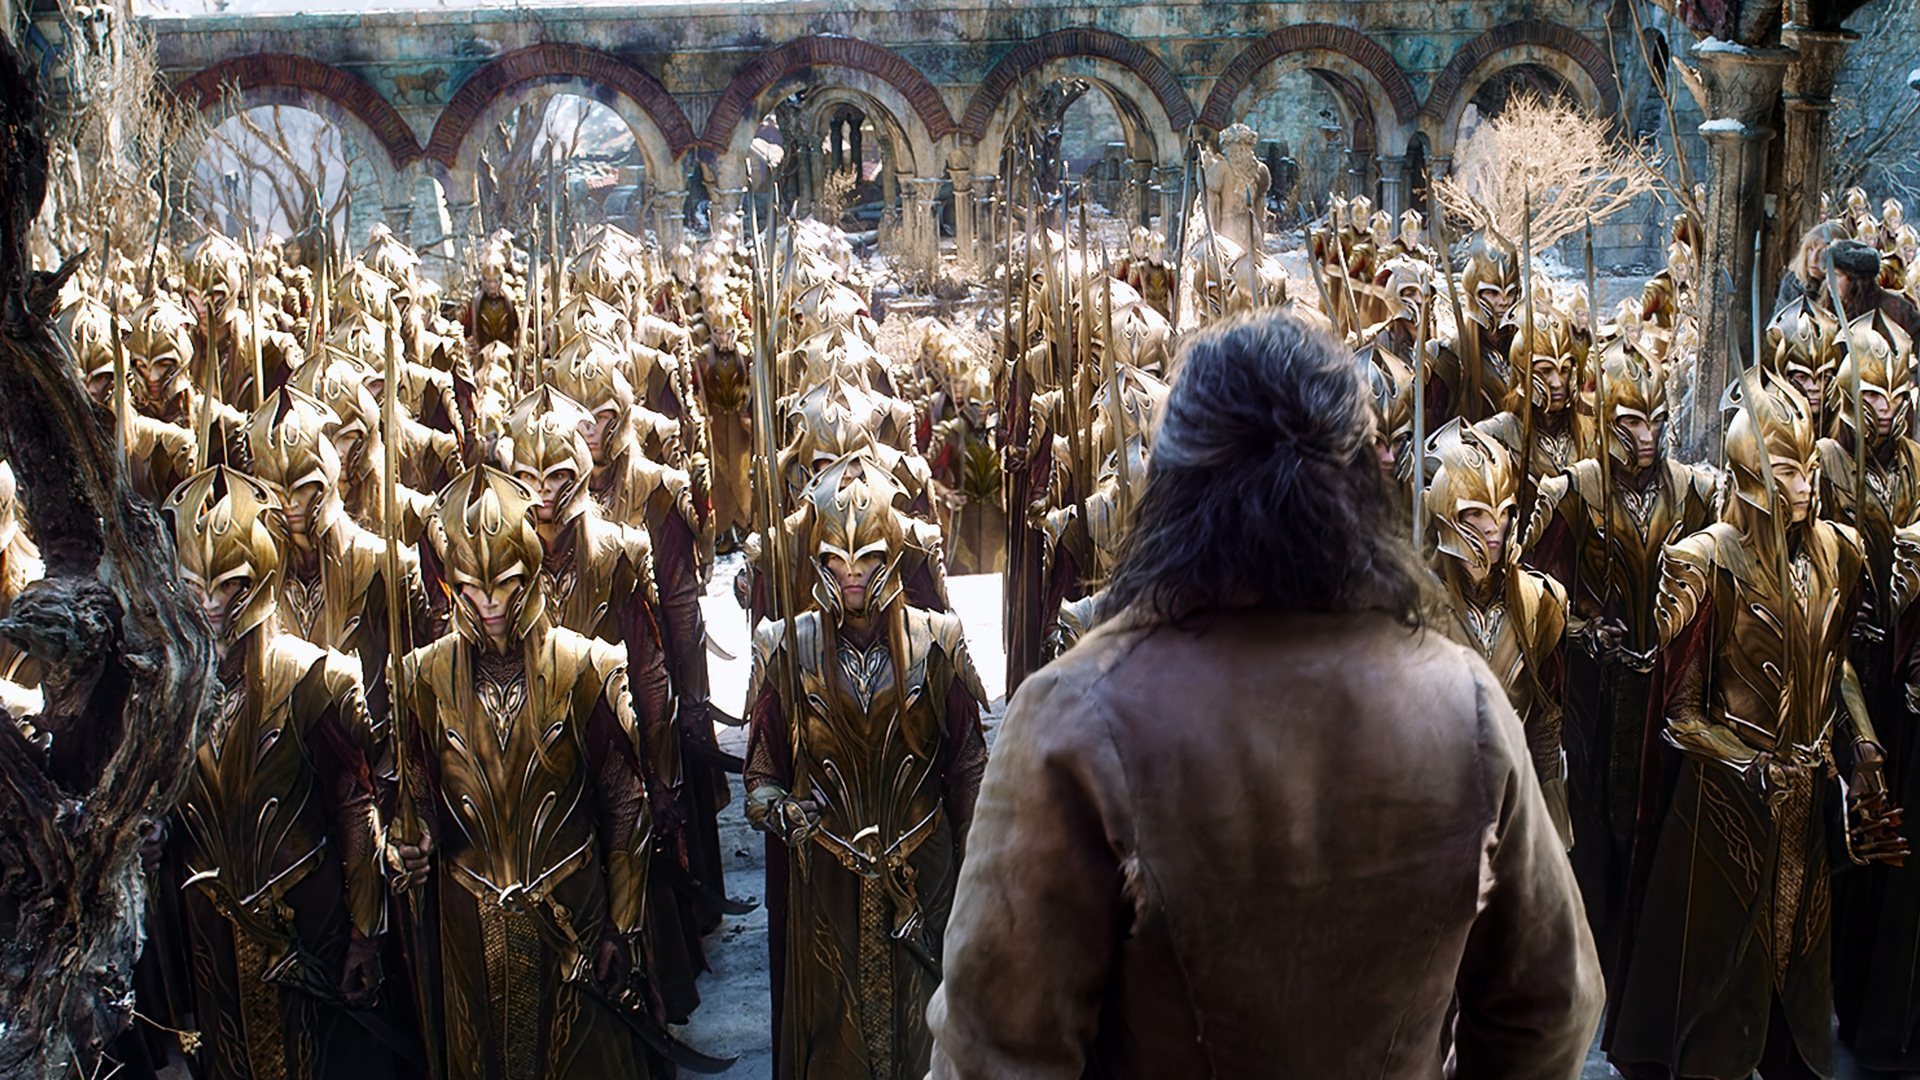 THE HOBBIT: THE BATTLE OF THE FIVE ARMIES